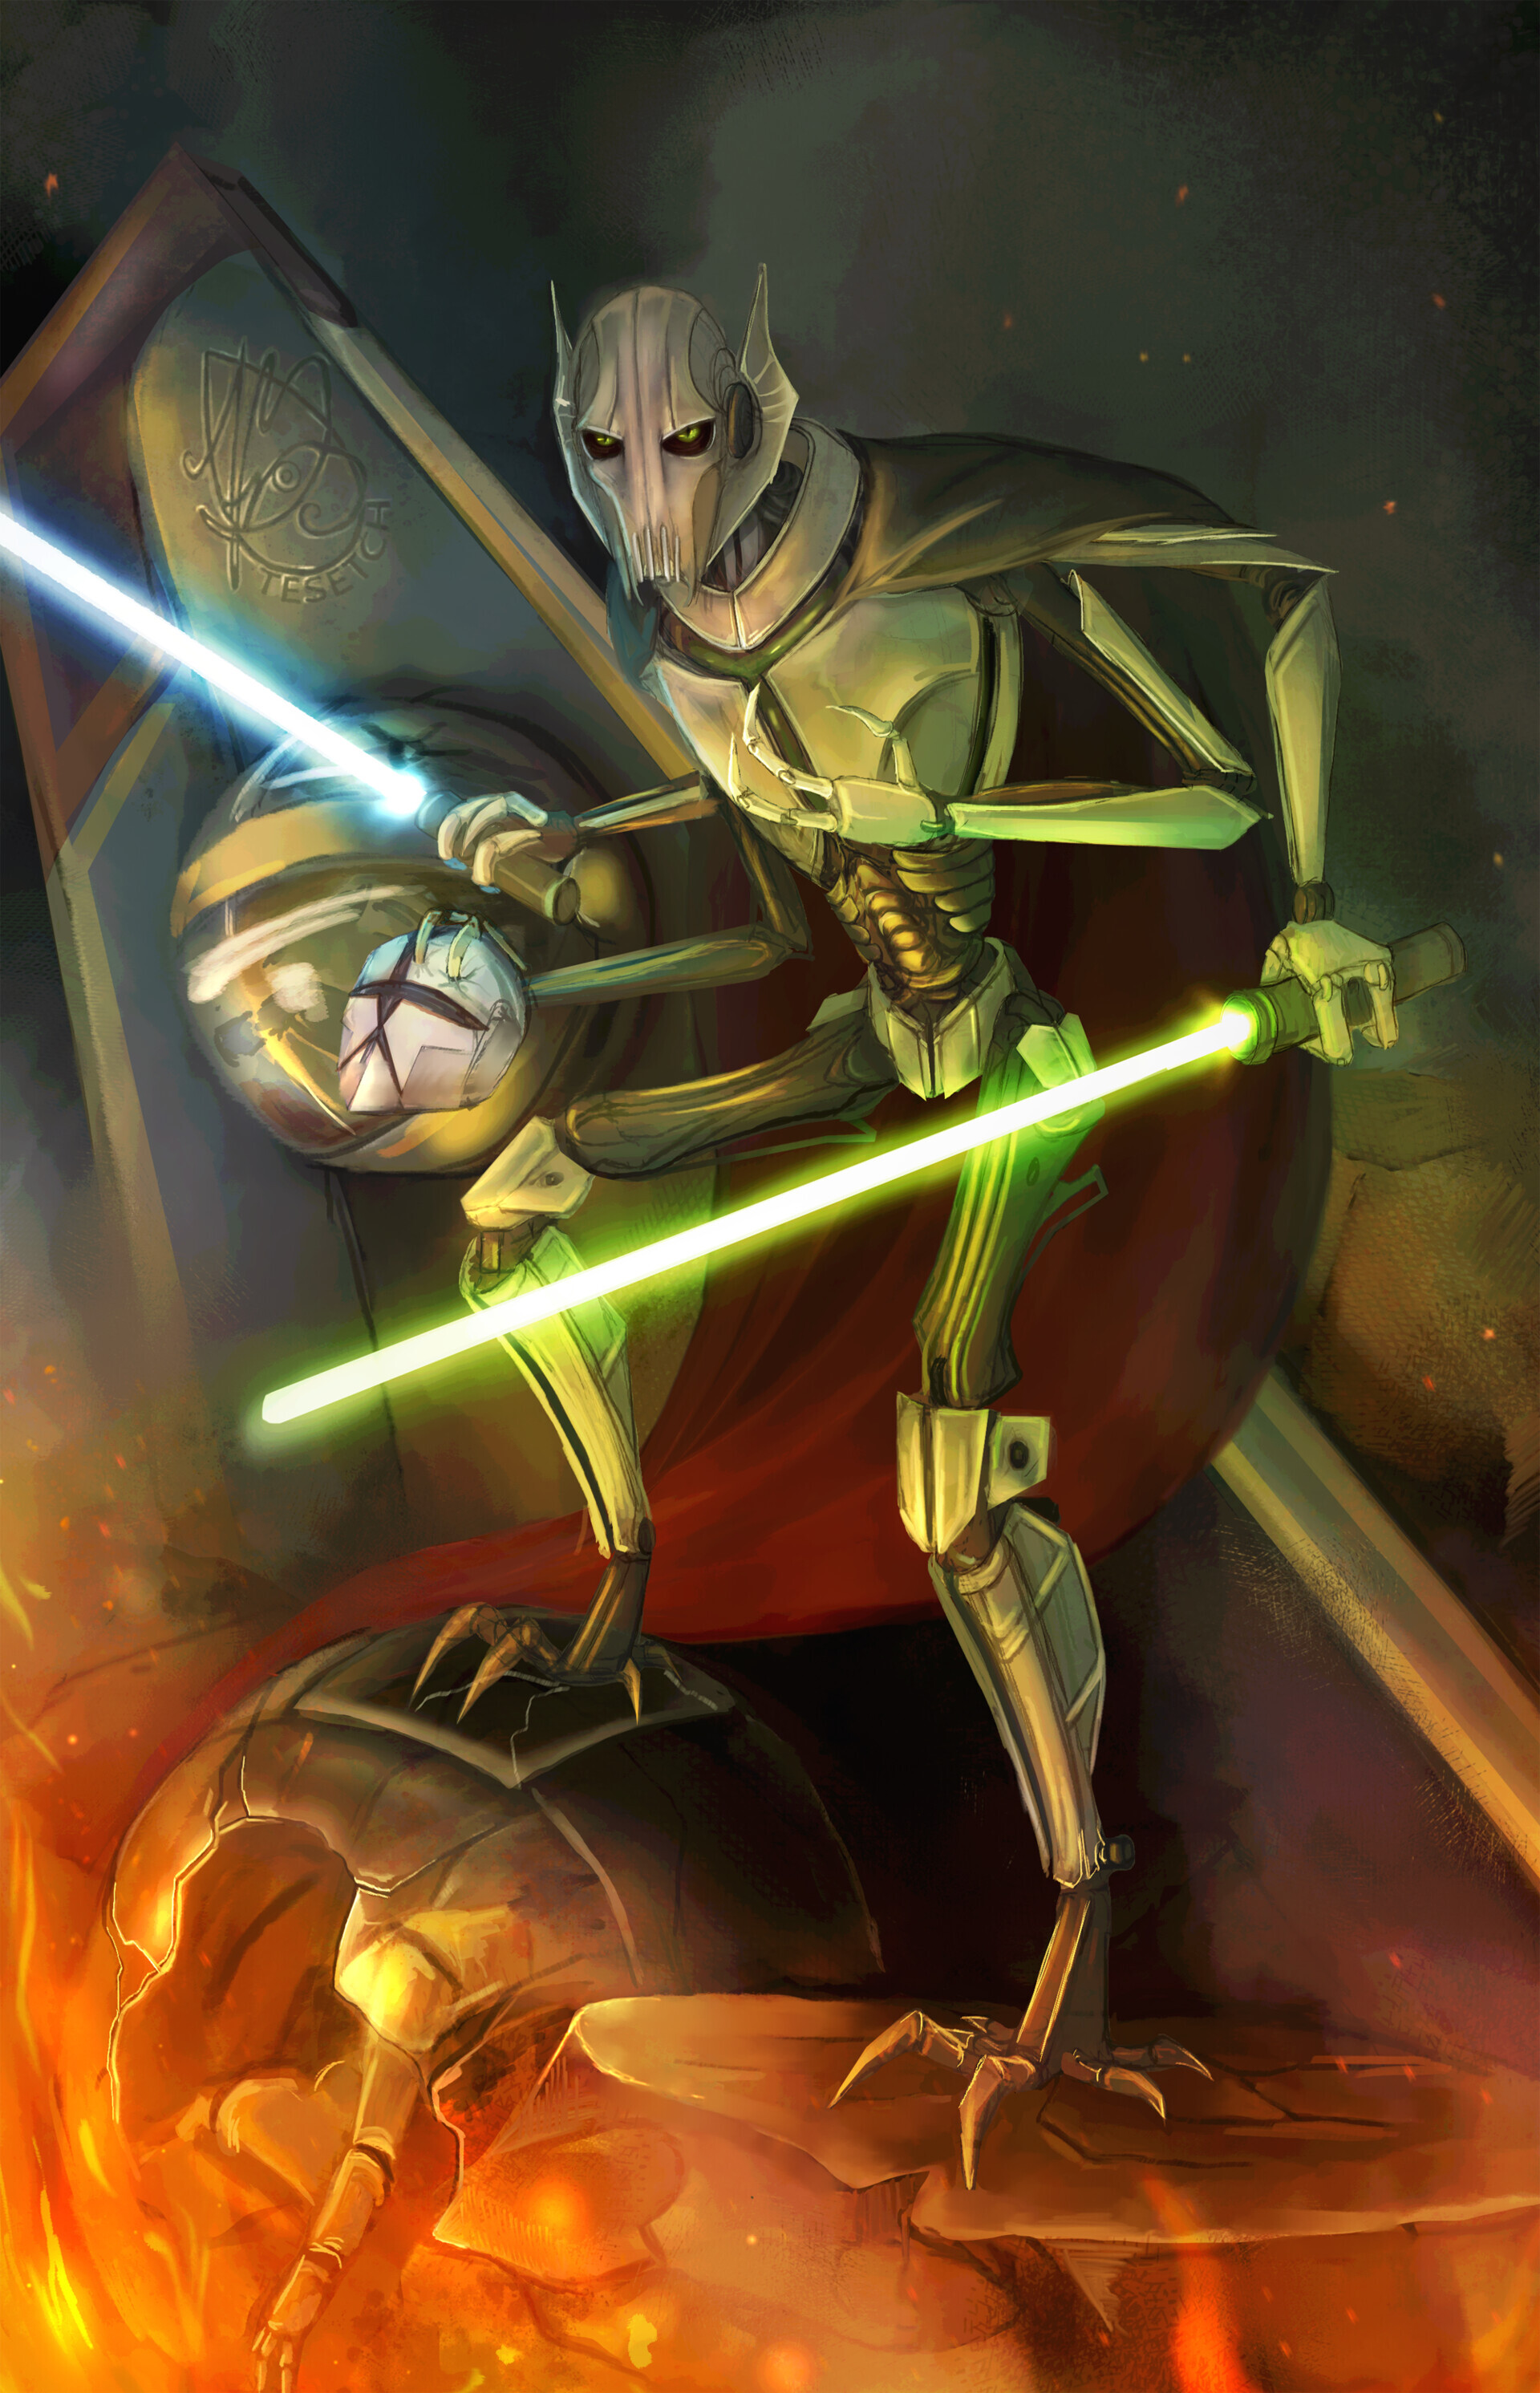 General Grievous: A powerful Kaleesh cyborg, The master of all forms of lightsaber combat, The Jedi of the Galactic Republic. 1920x2990 HD Wallpaper.